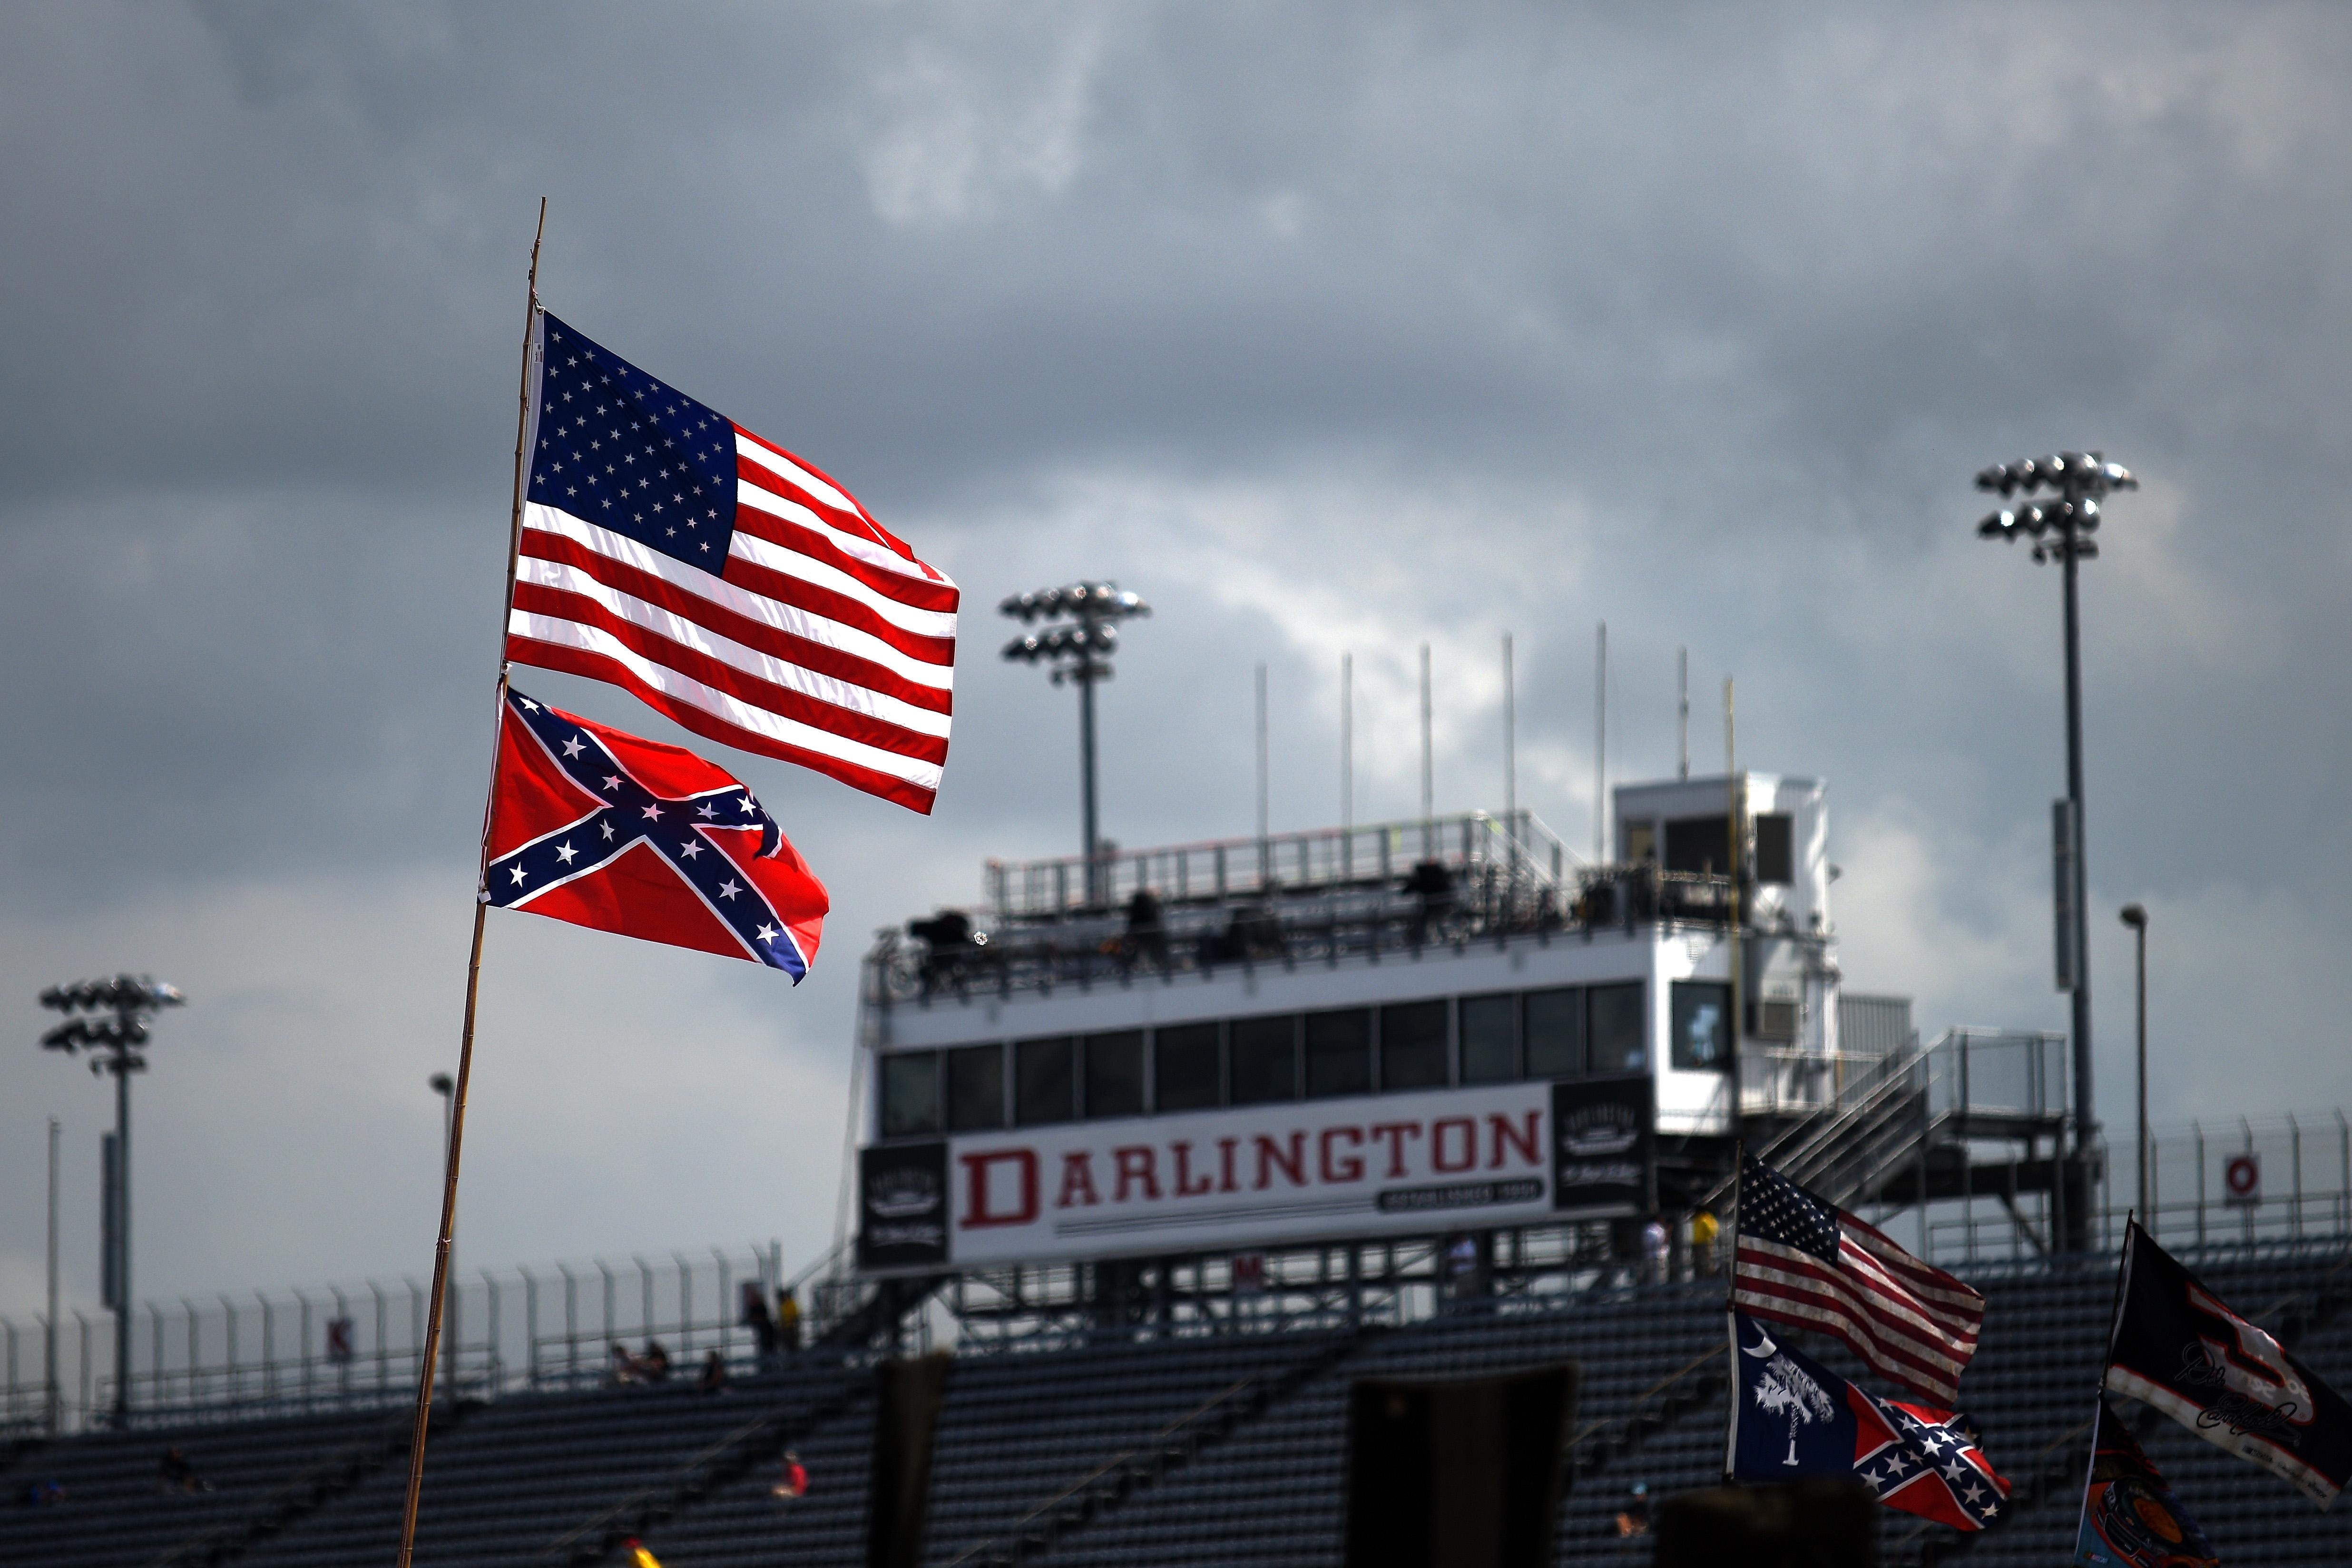 American and Confederate flags are seen flying over a stadium that features a large Darlington sign.